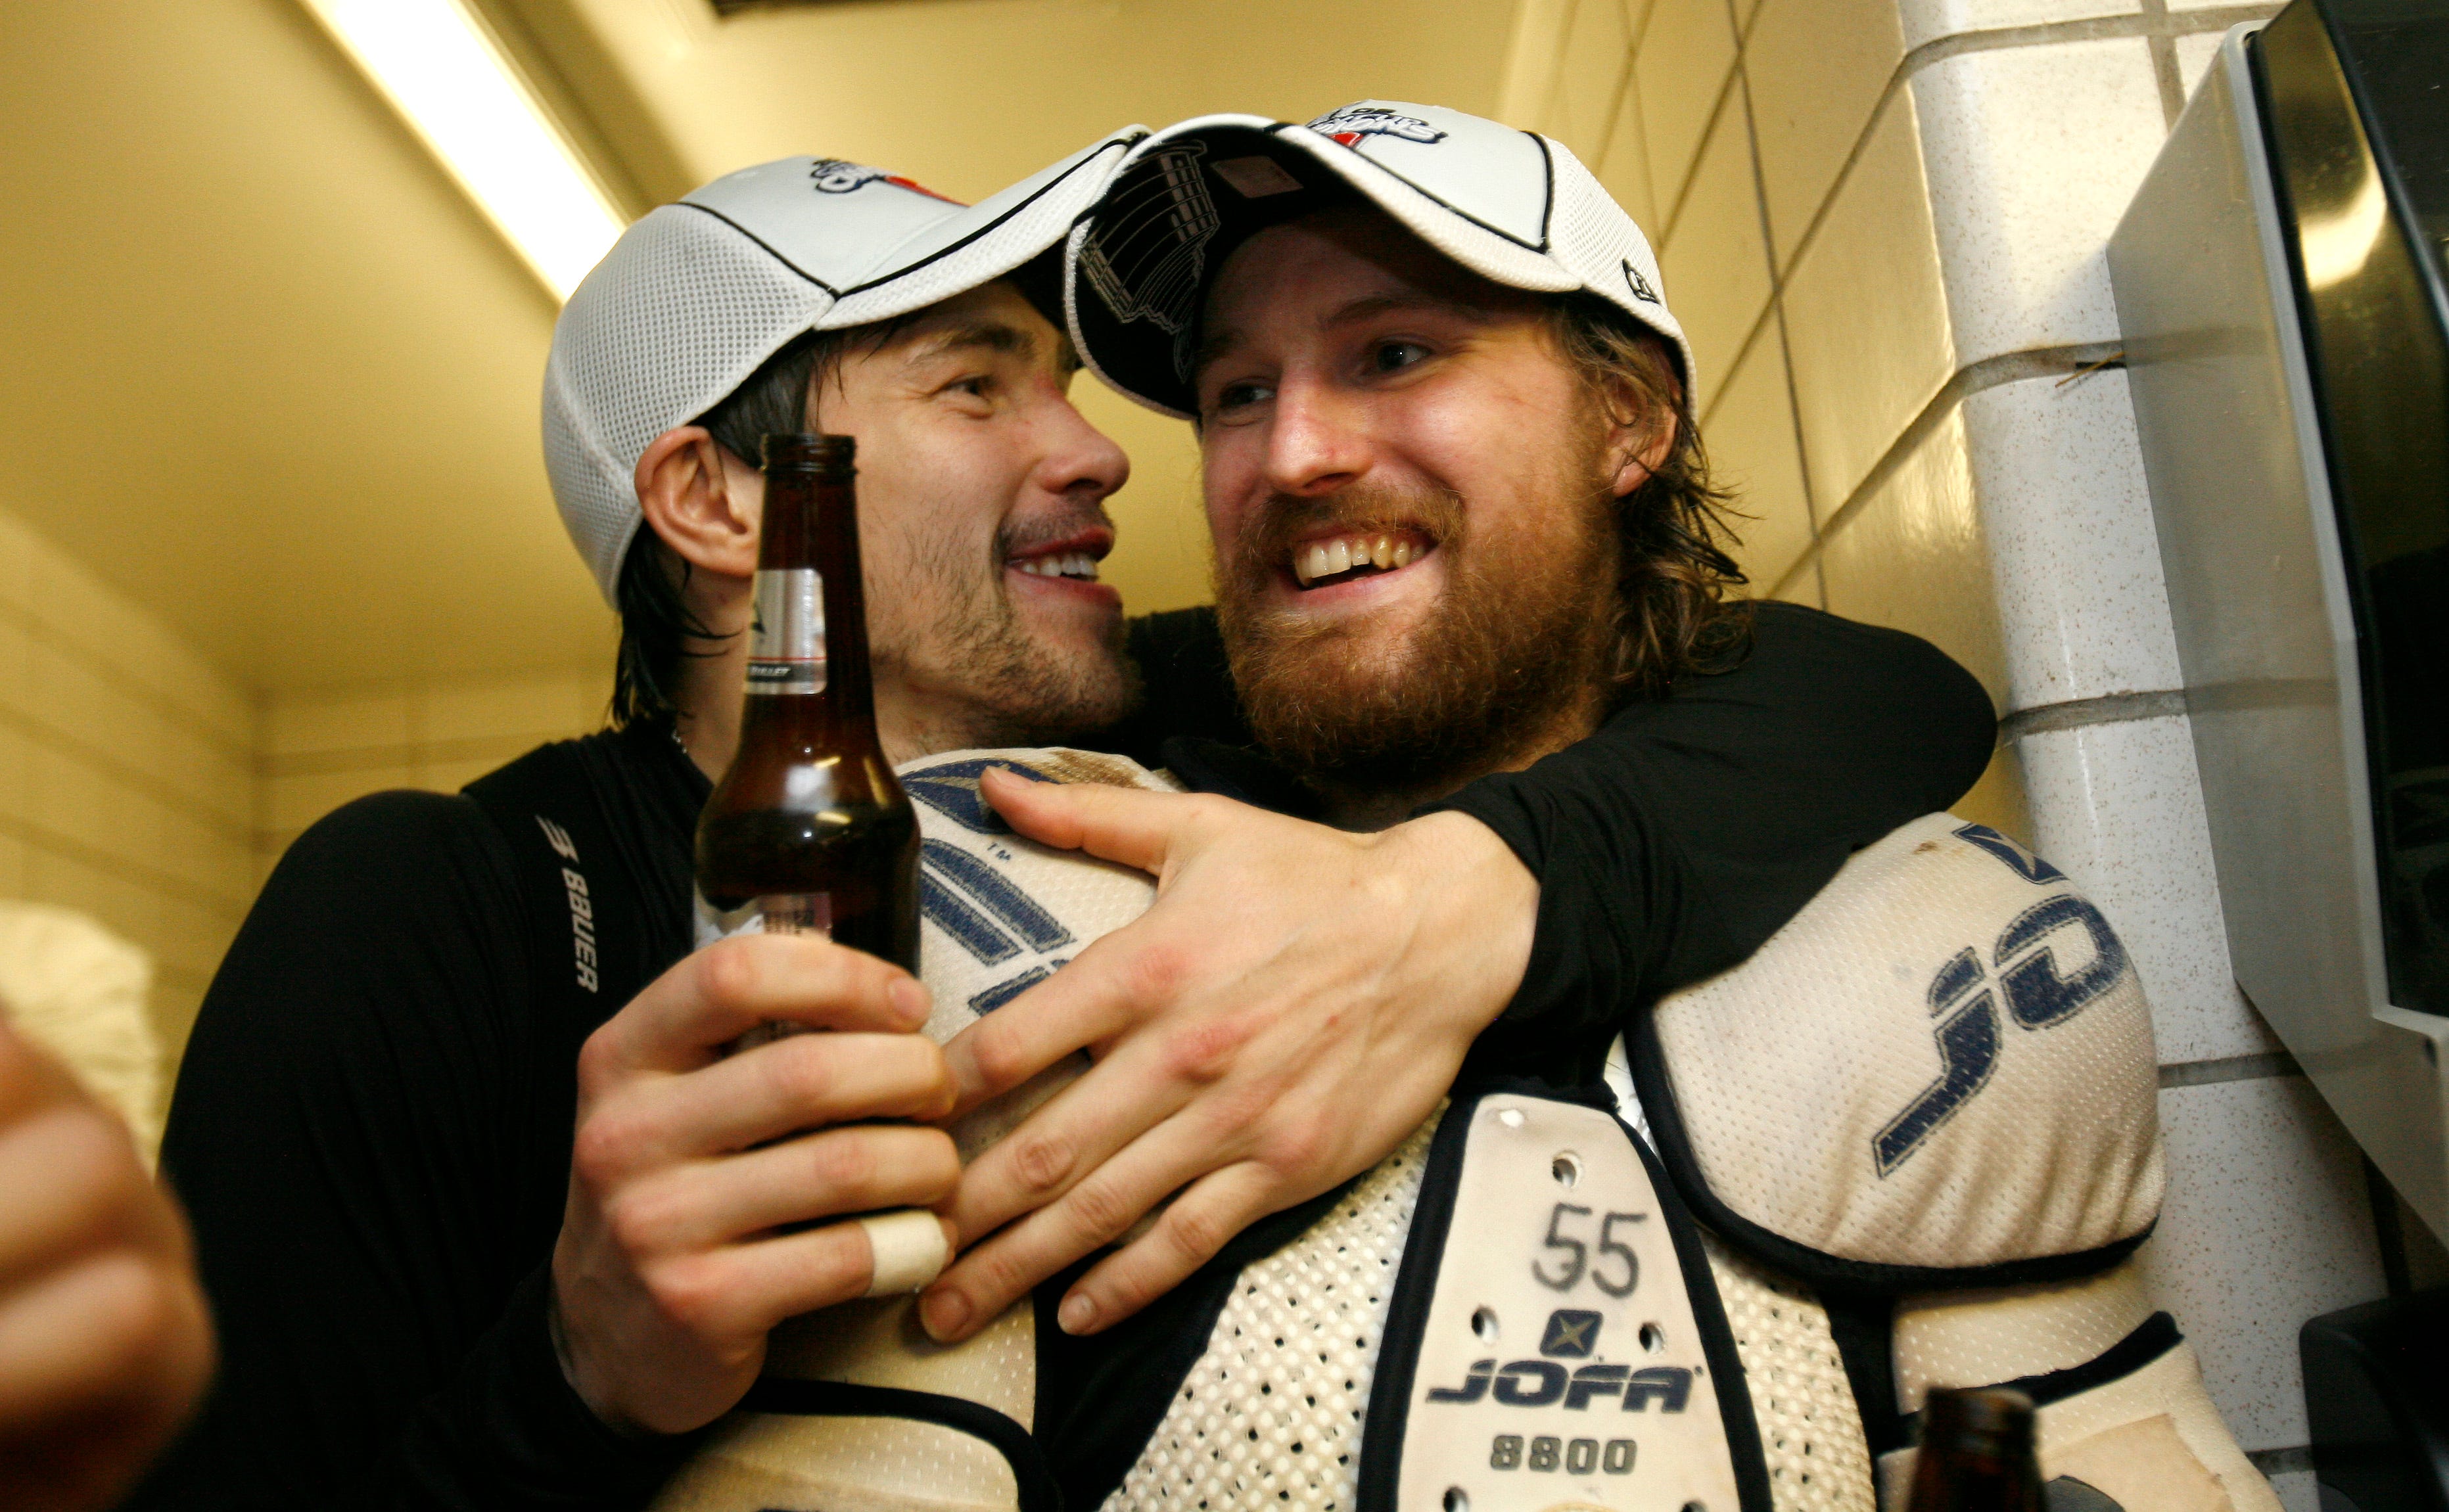 Pavel Datsyuk, left, and Niklas Kronwall celebrate their Stanley Cup victory over the Pittsburgh Penguins in the jubilant visitors dressing room at Mellon Arena in Pittsburgh on June 4, 2008.